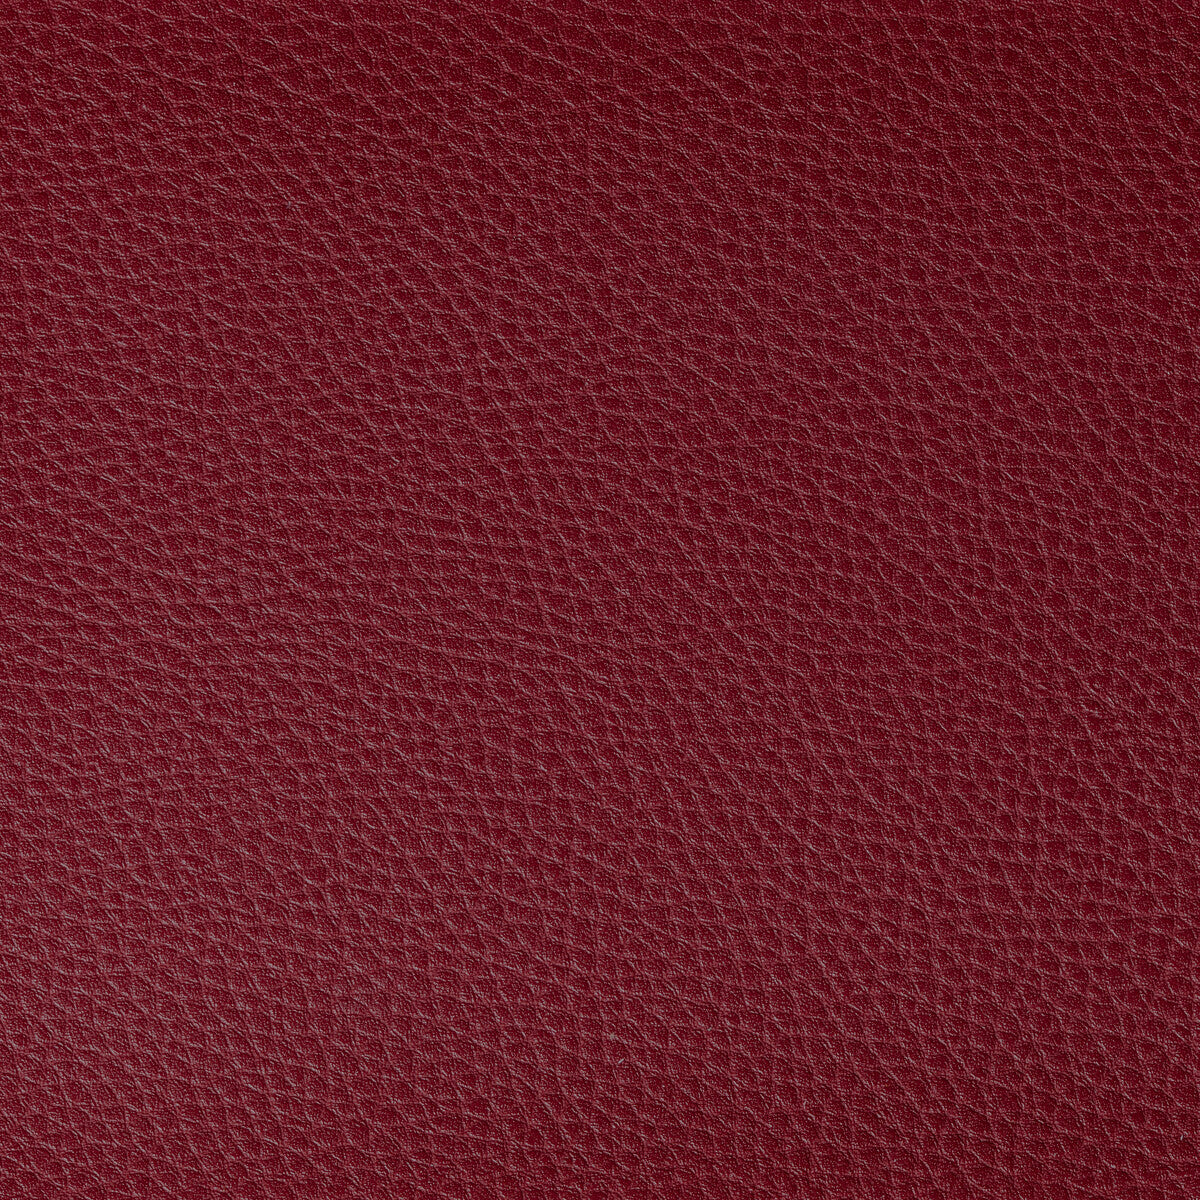 Boone fabric in sangria color - pattern BOONE.19.0 - by Kravet Contract in the Foundations / Value collection